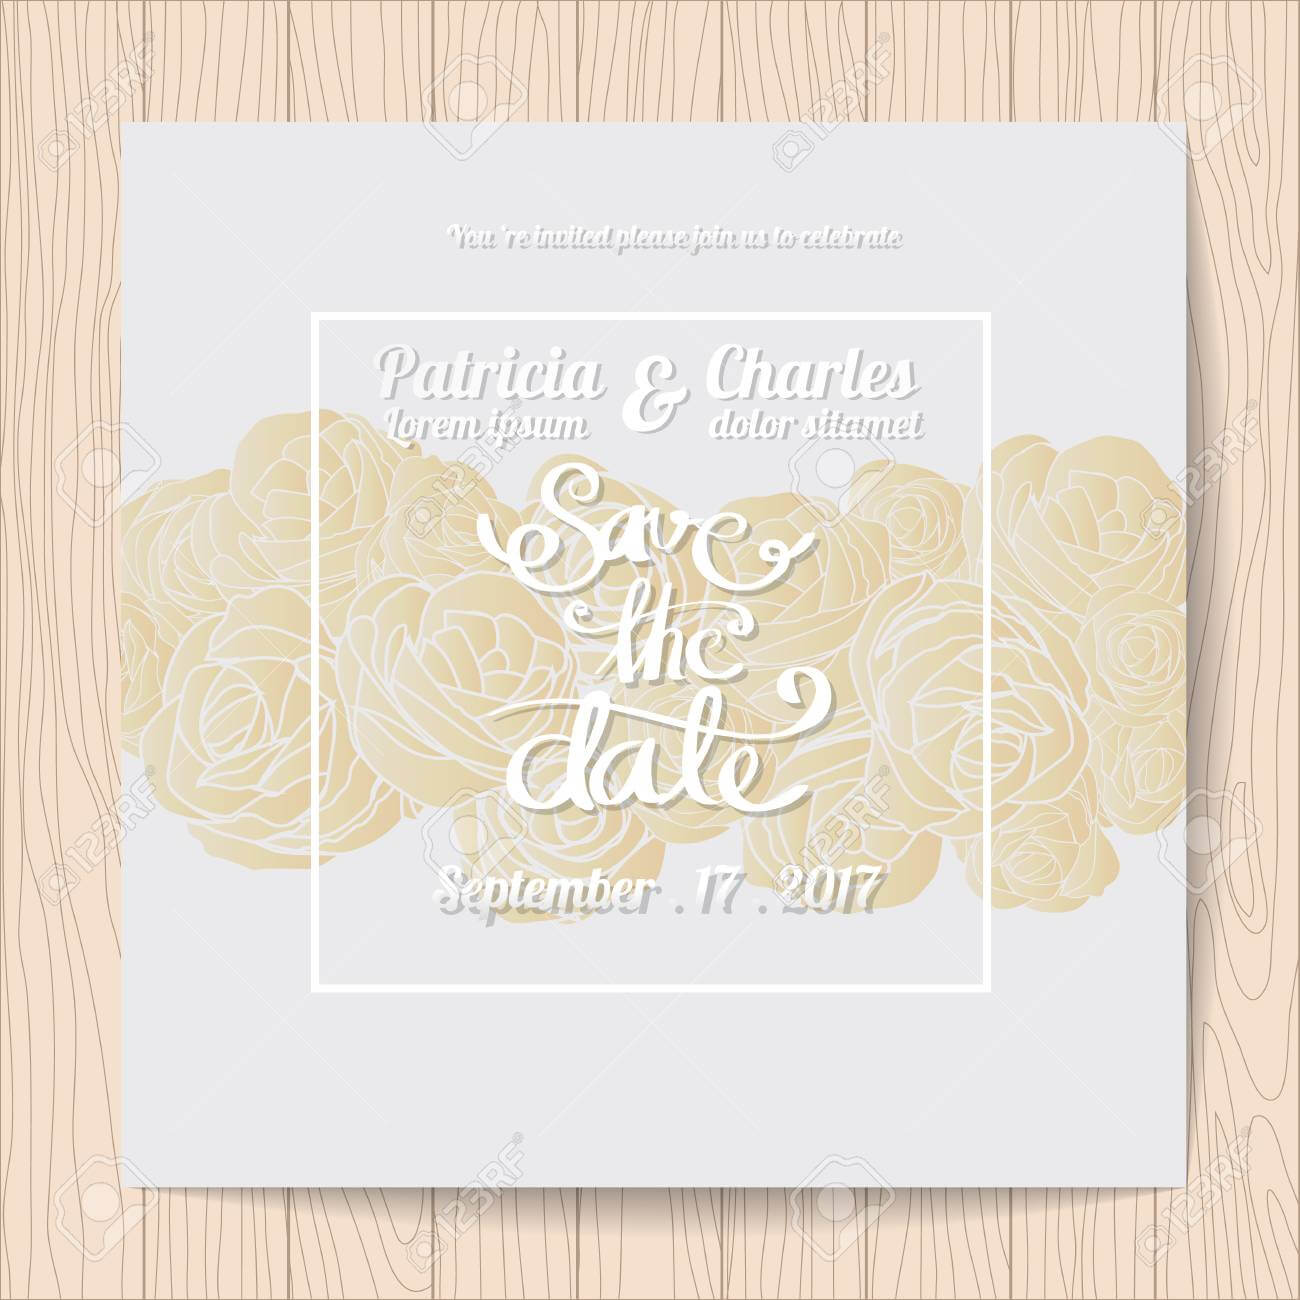 Wedding Invitation Card Templates For Celebrate It Templates Place Cards